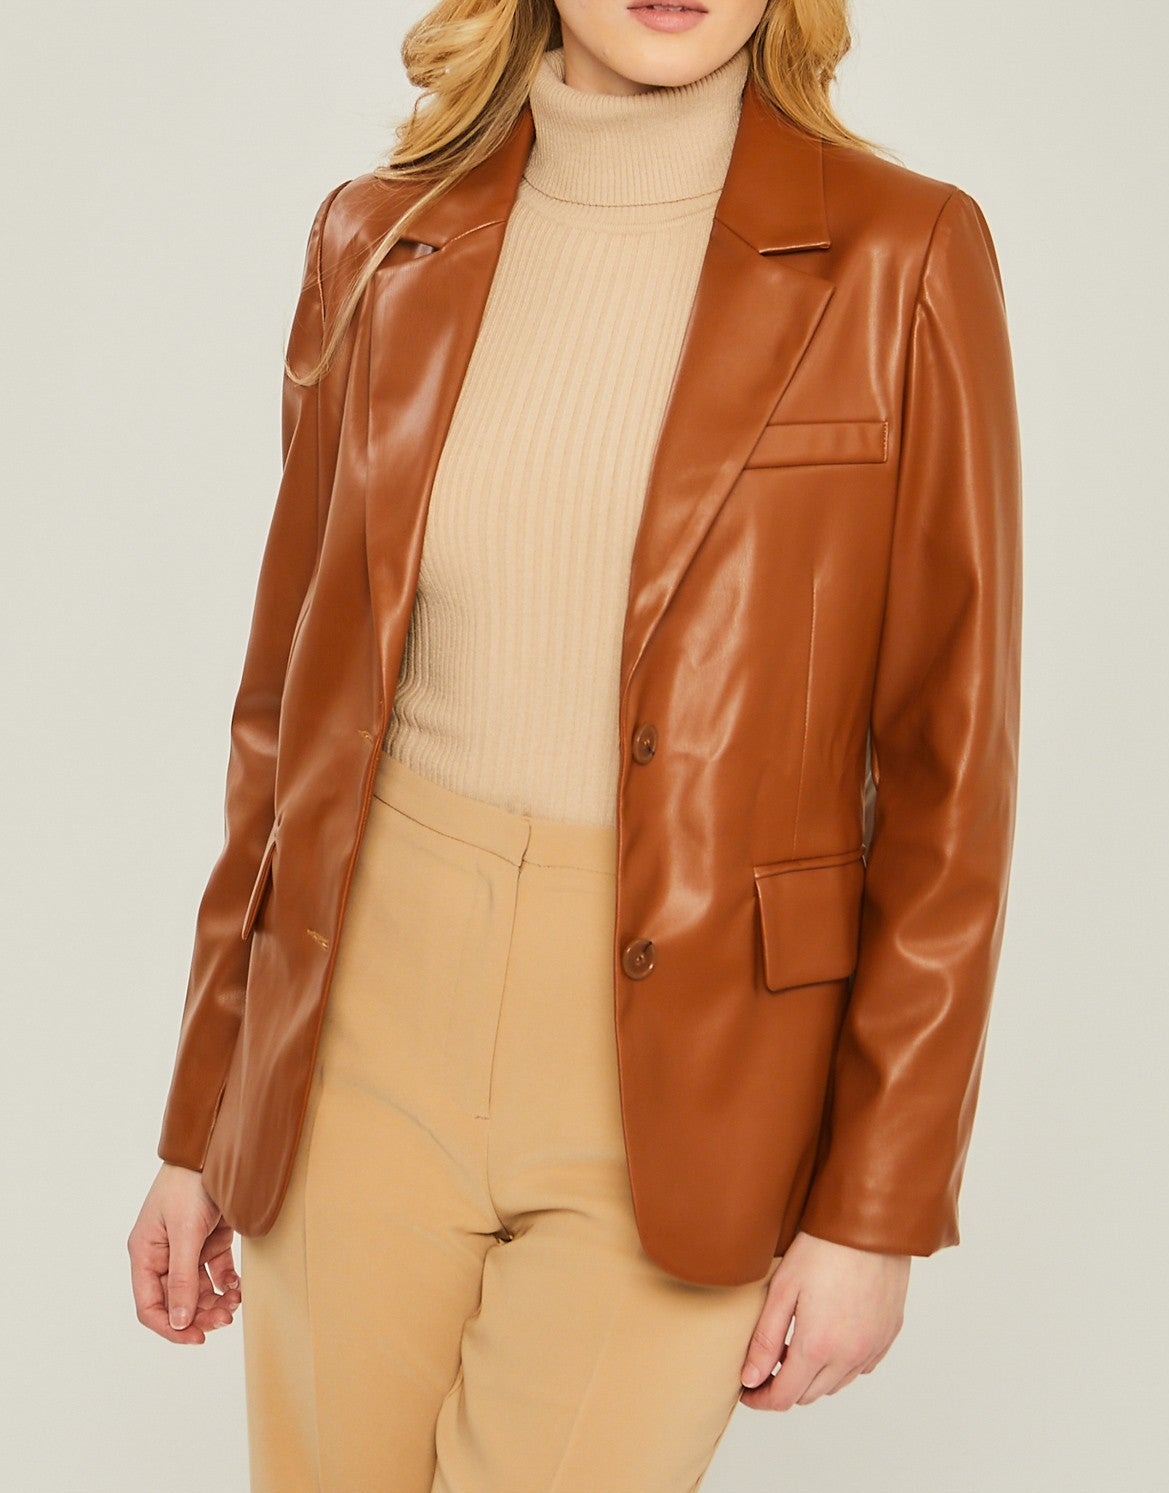 Taking Charge Solid Faux Leather Blazer